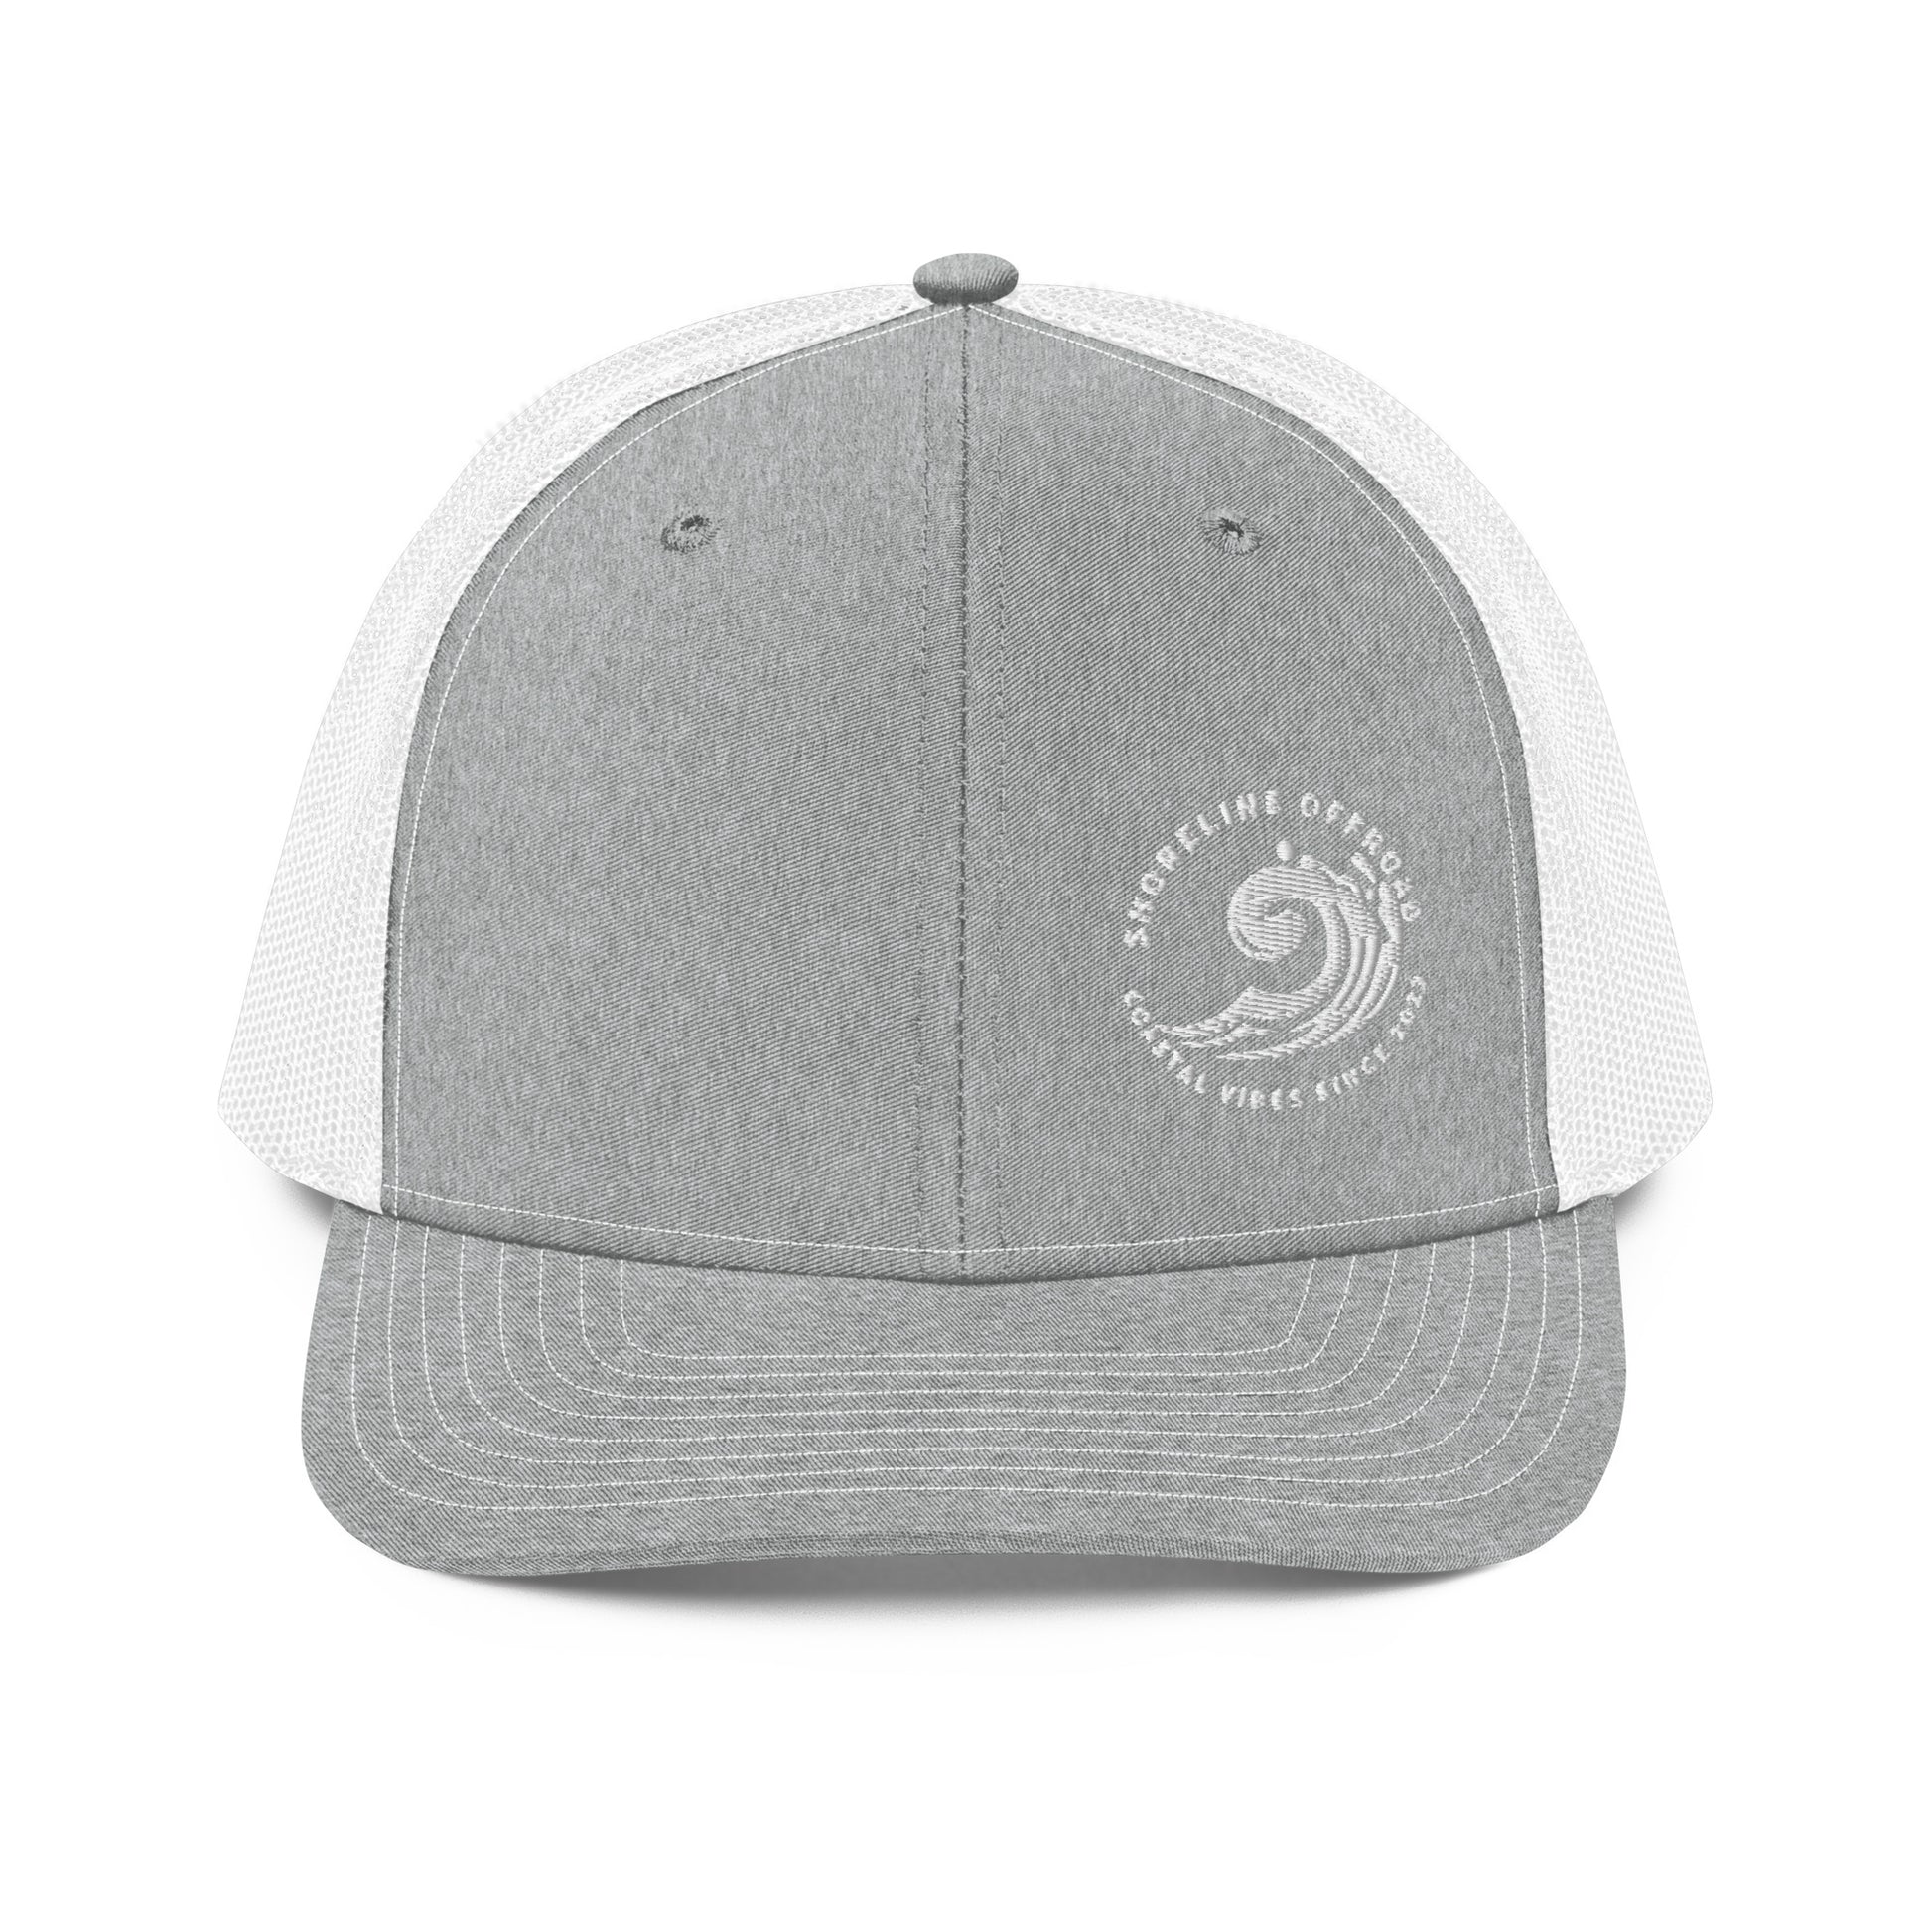 a grey and white trucker hat with a white logo